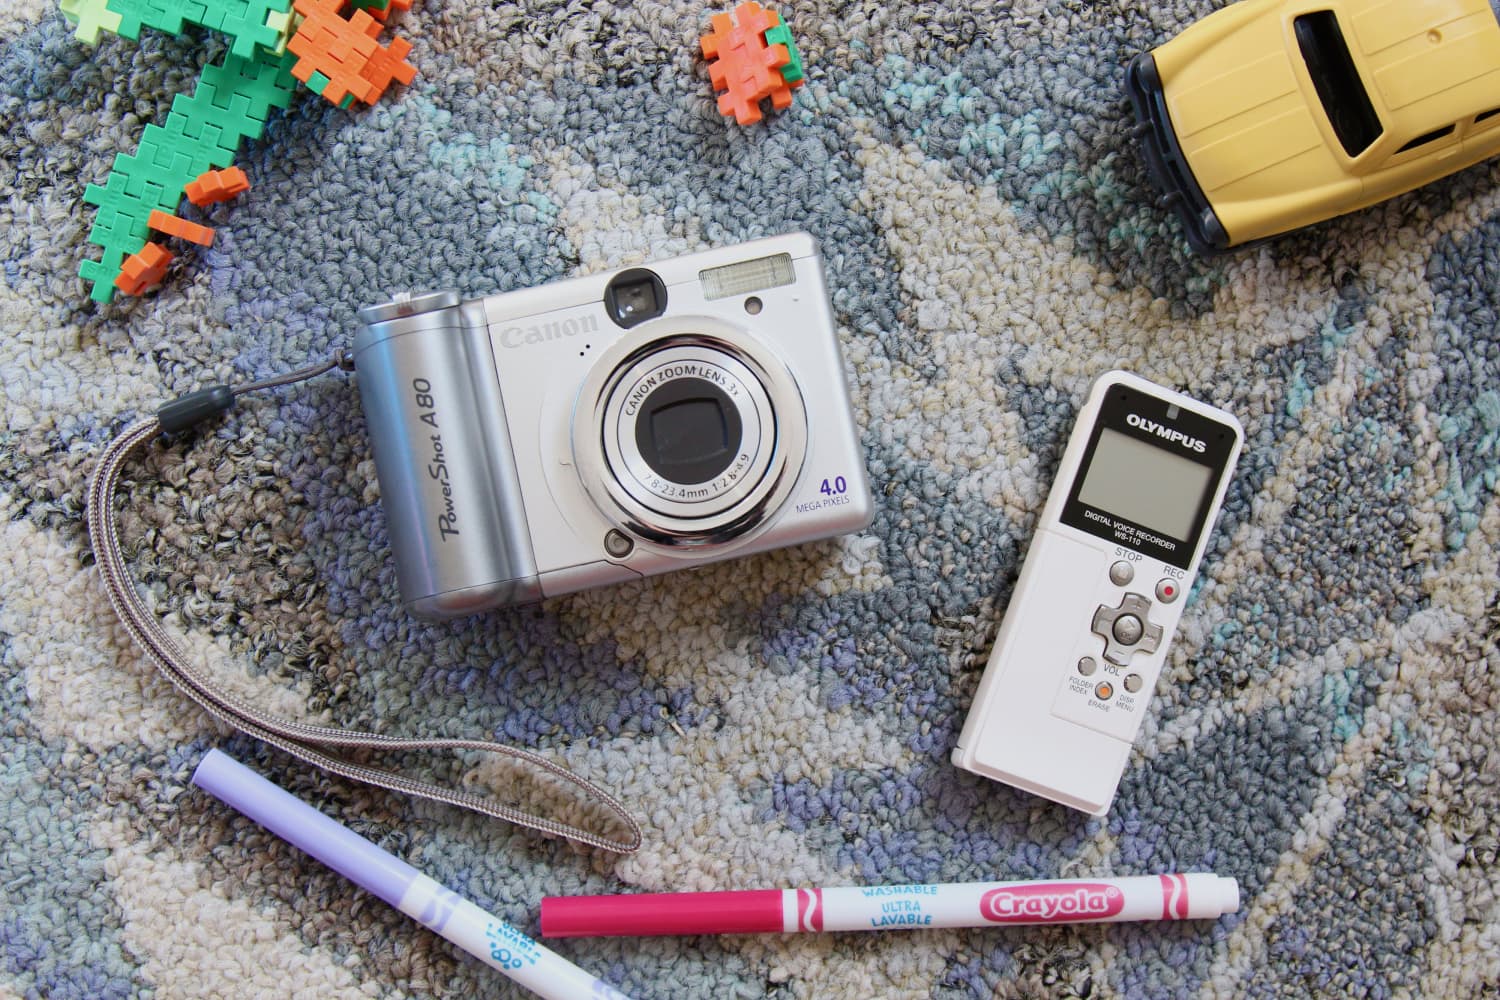 Your Old Digital Camera Is Just Sitting in a Drawer When It Could Be Your Kid’s New Favorite Toy